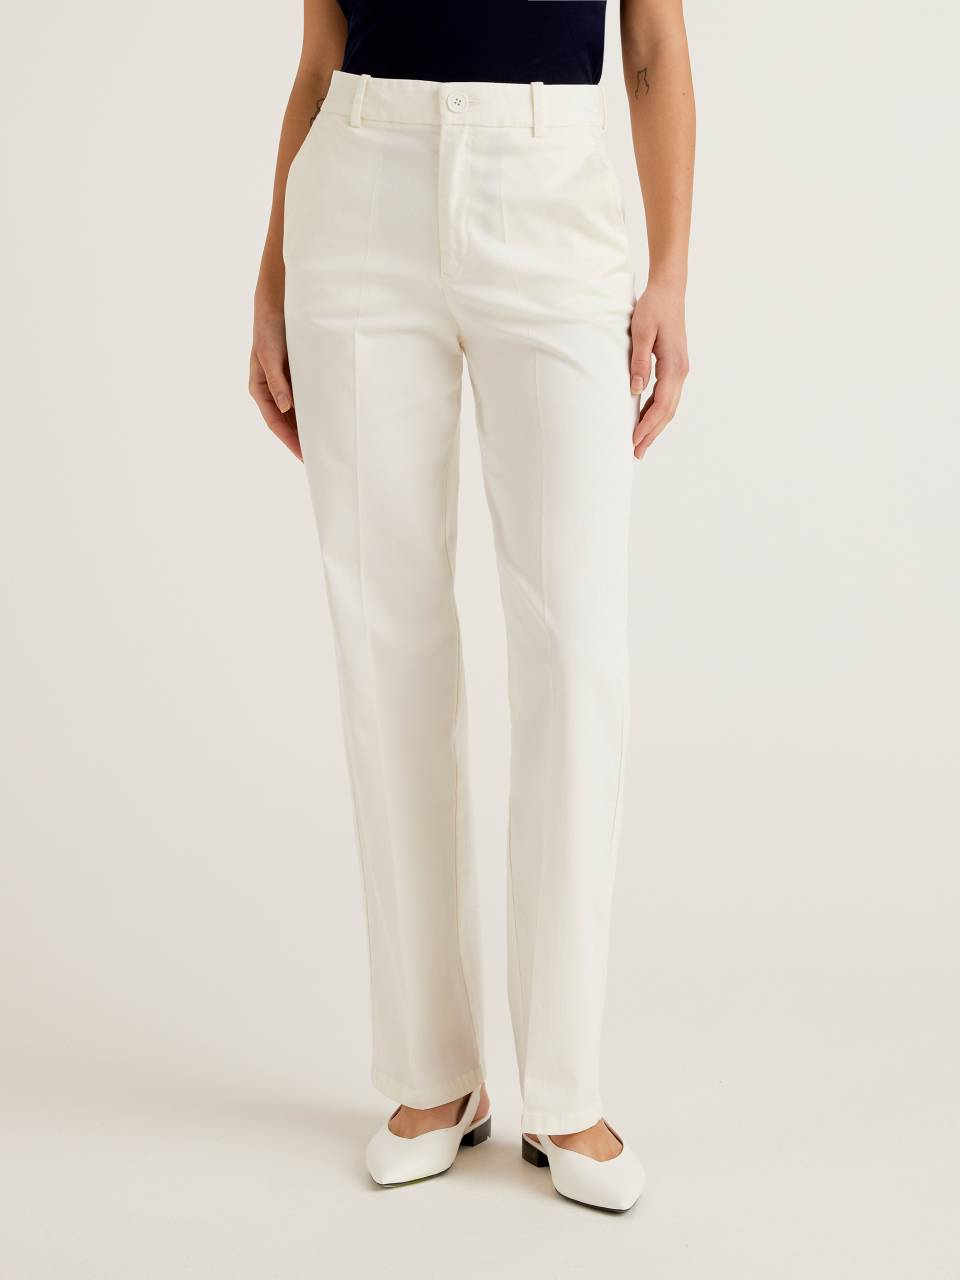 Benetton Trousers with wide leg. 1